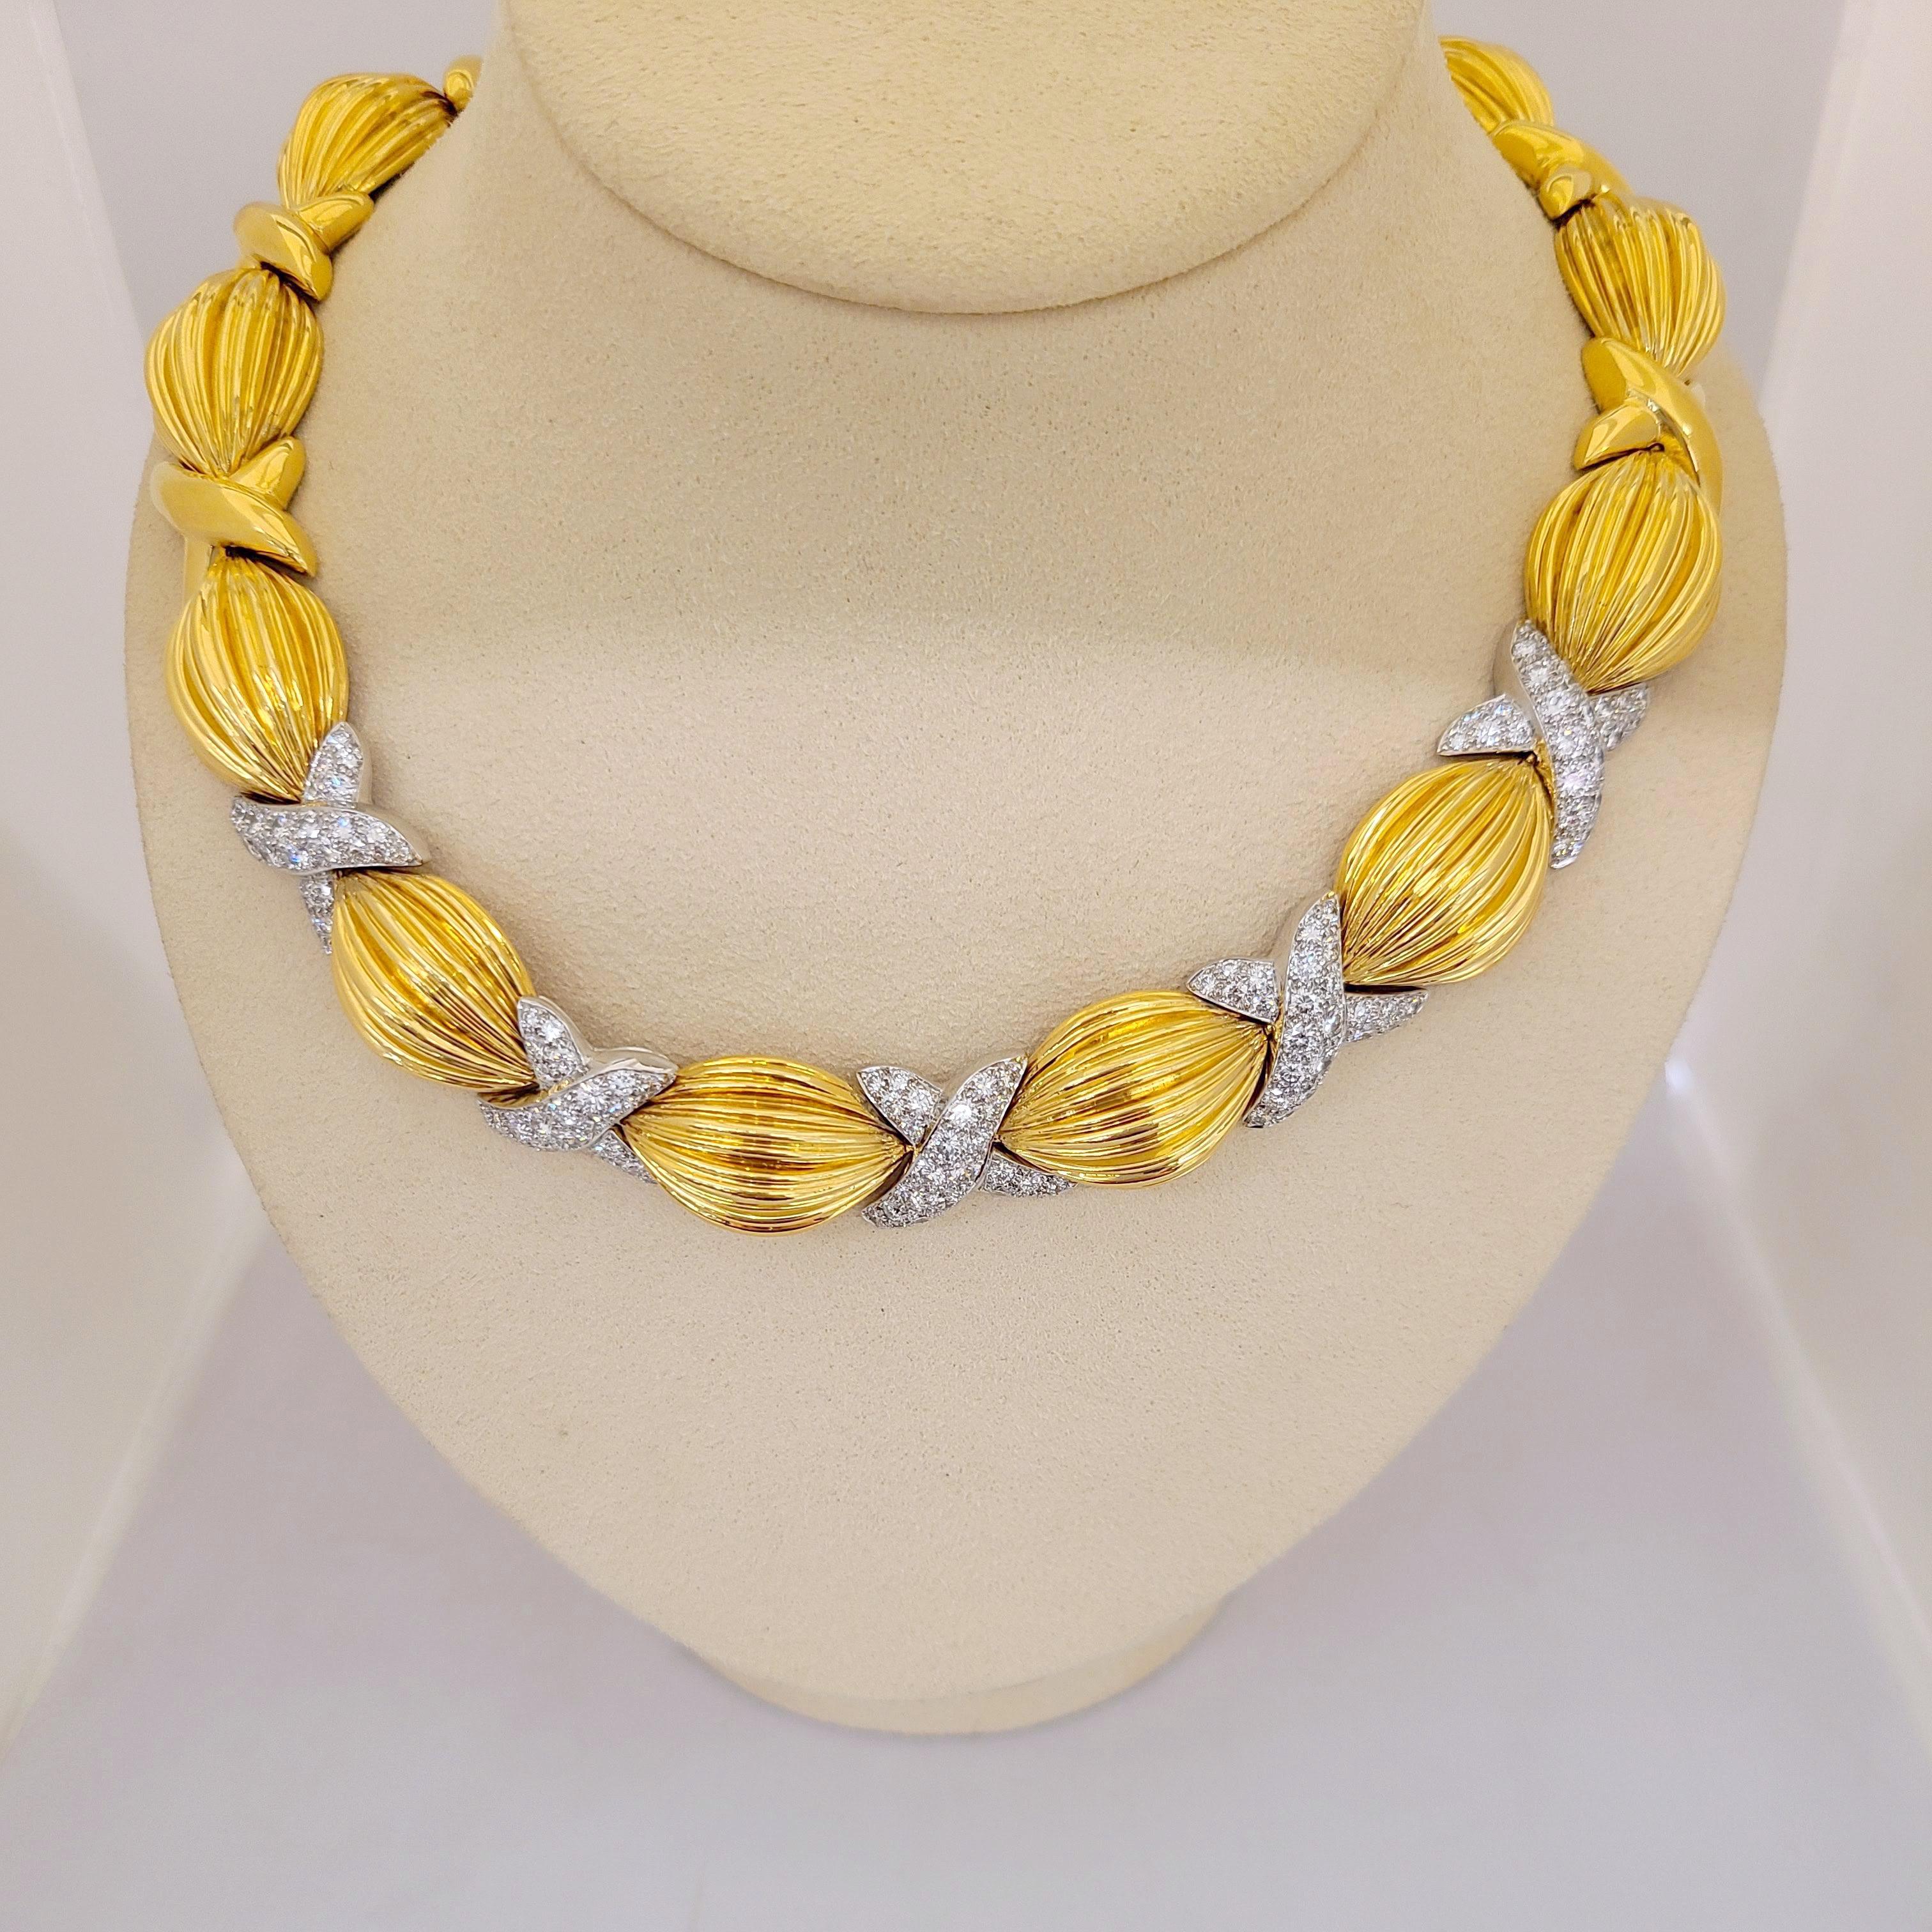 Designed by the legendary Charles Turi Jewelry Company, this  magnificent classic necklace is crafted in 18 karat yellow gold and platinum. Created with 13 fluted oval sections divided with 5 x's which have been beautifully set with pave diamonds.